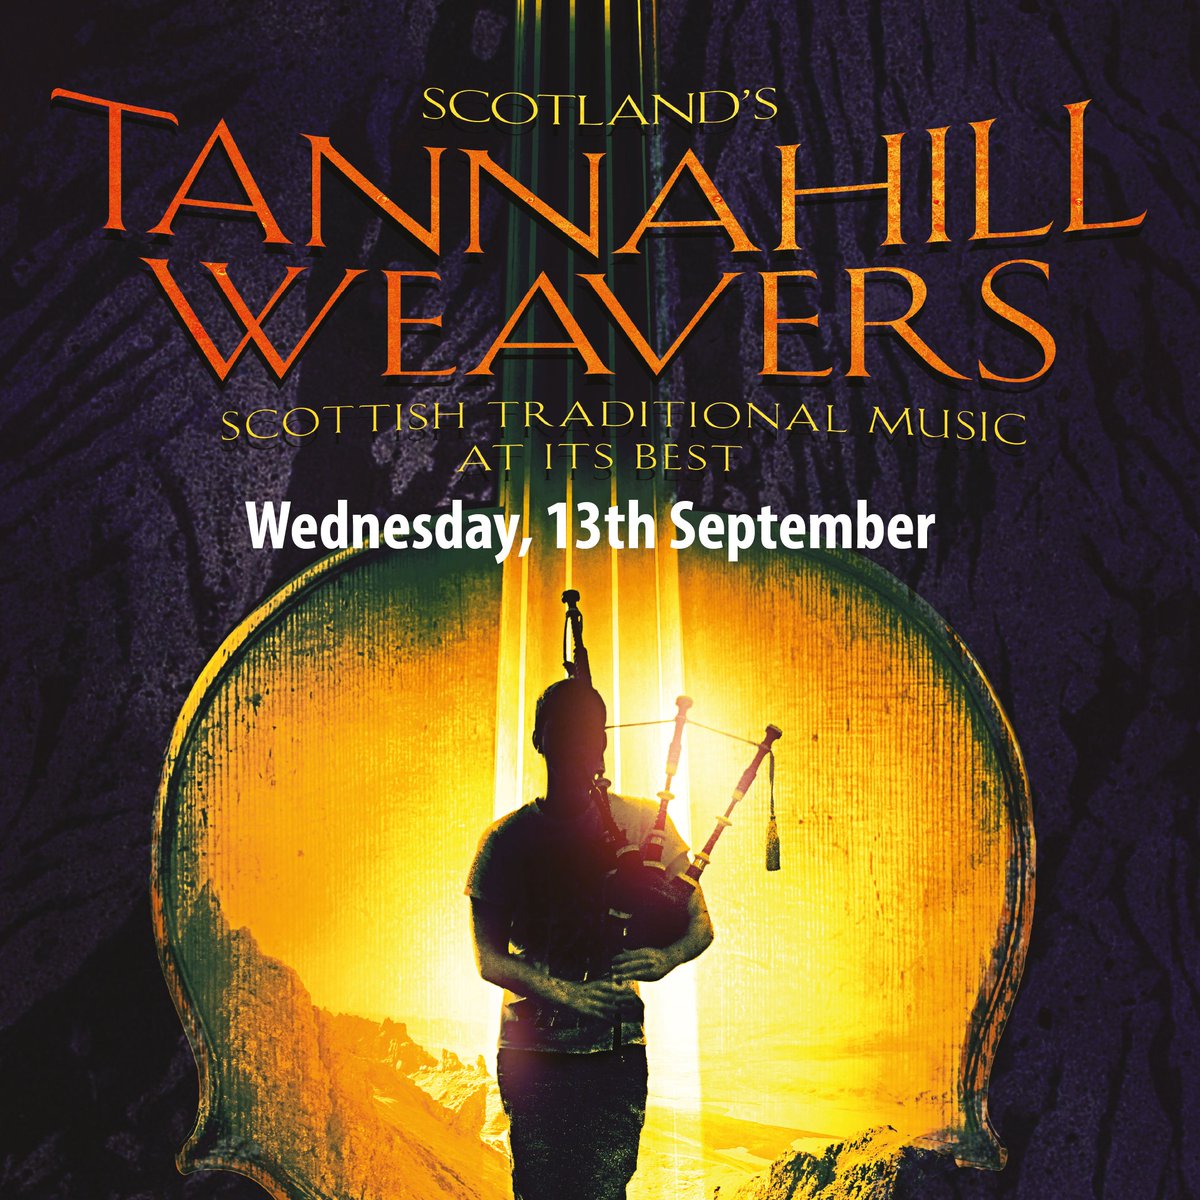 Scotland's @Tannahillweaver bring traditional Celtic music at it's finest to @JohnPeelCentre on Wed, 13th September - fire-driven instrumentals, topical songs, haunting ballads and a good dose of humour! Find out more... johnpeelcentre.com/event/the-tann… #Celticmusic